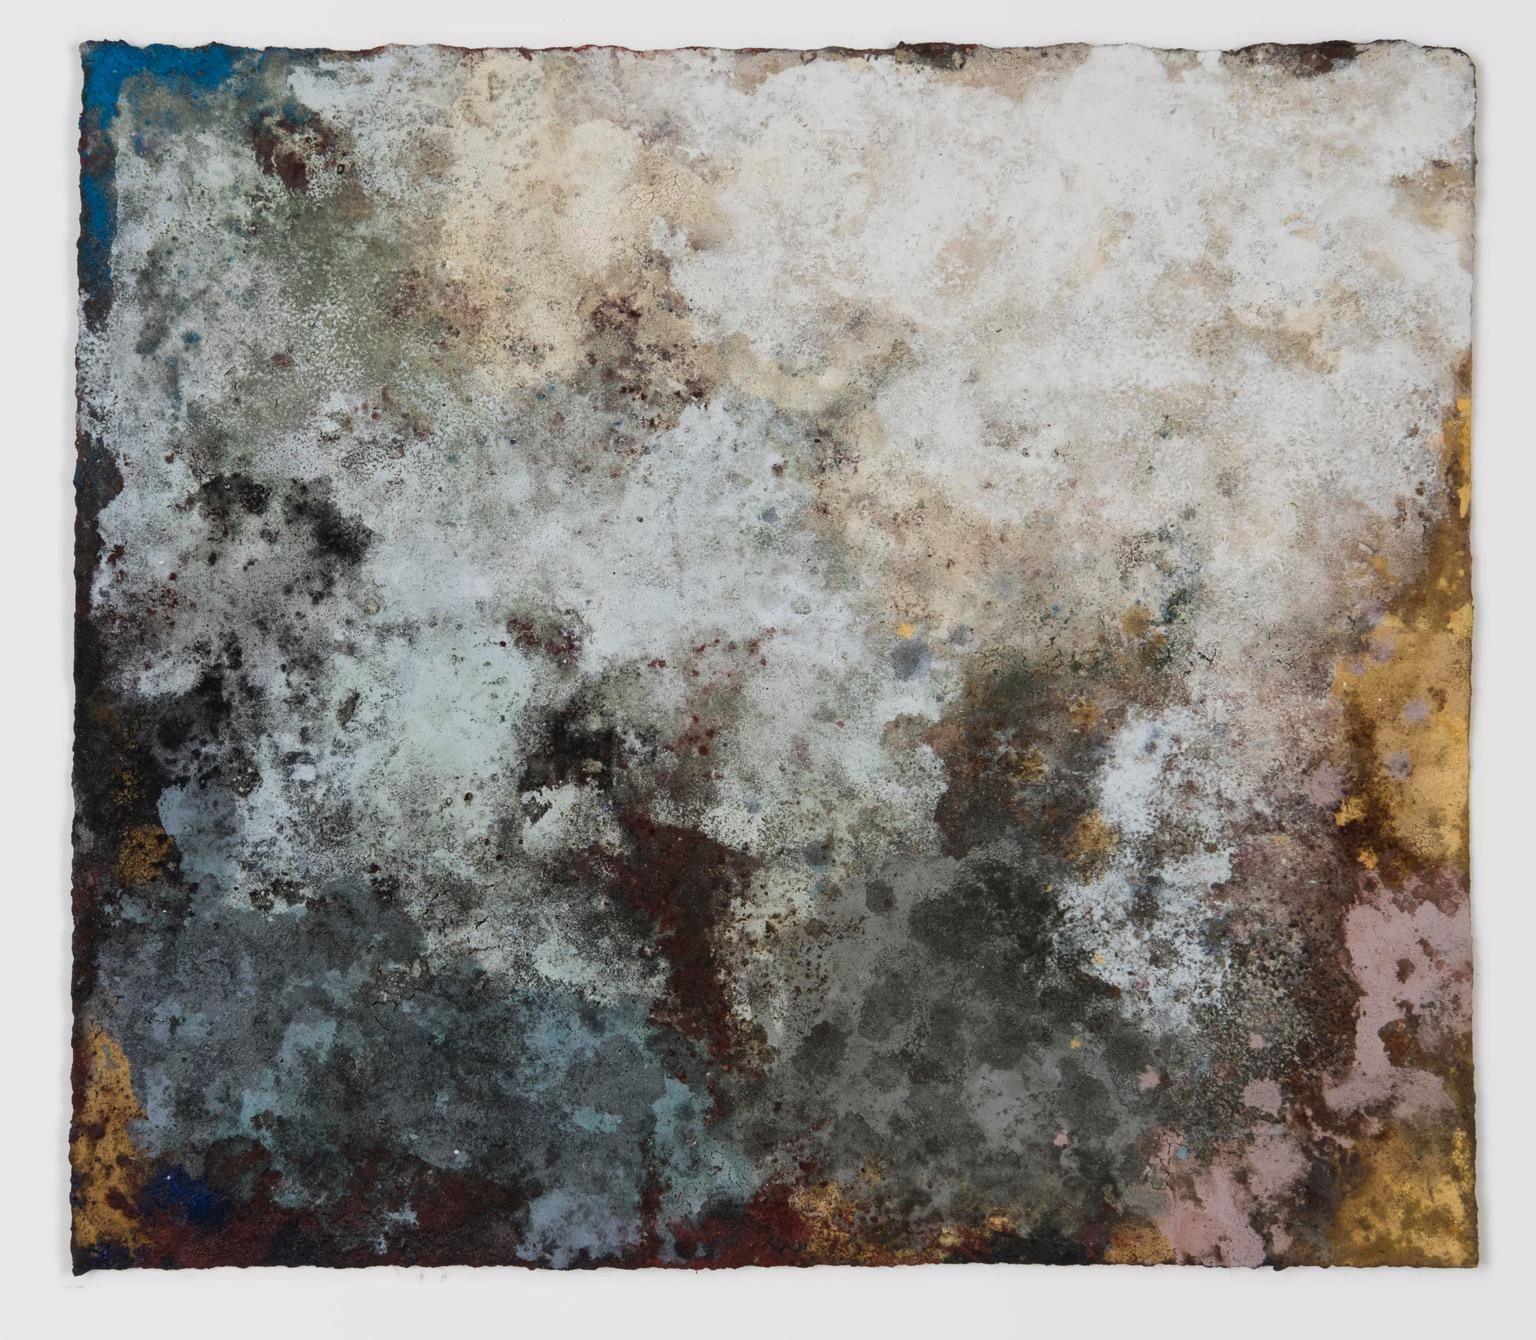 Terra Bruciata #18 (Scorched Earth) - Abstract Blue, Grey, and Yellow Painting